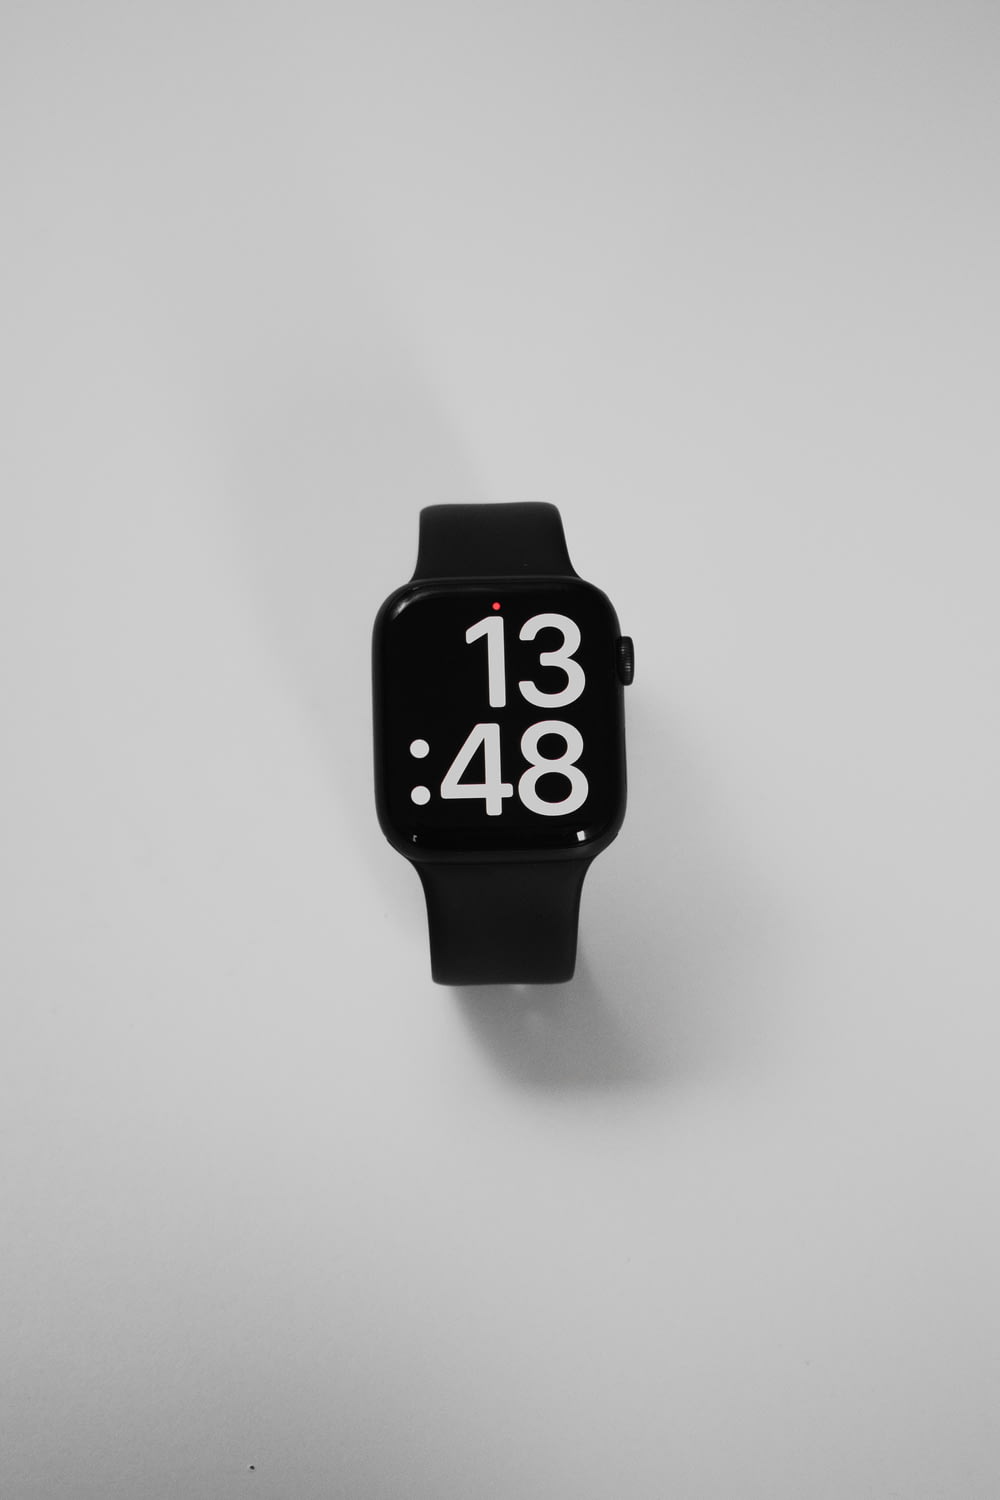 a black watch with white numbers on it